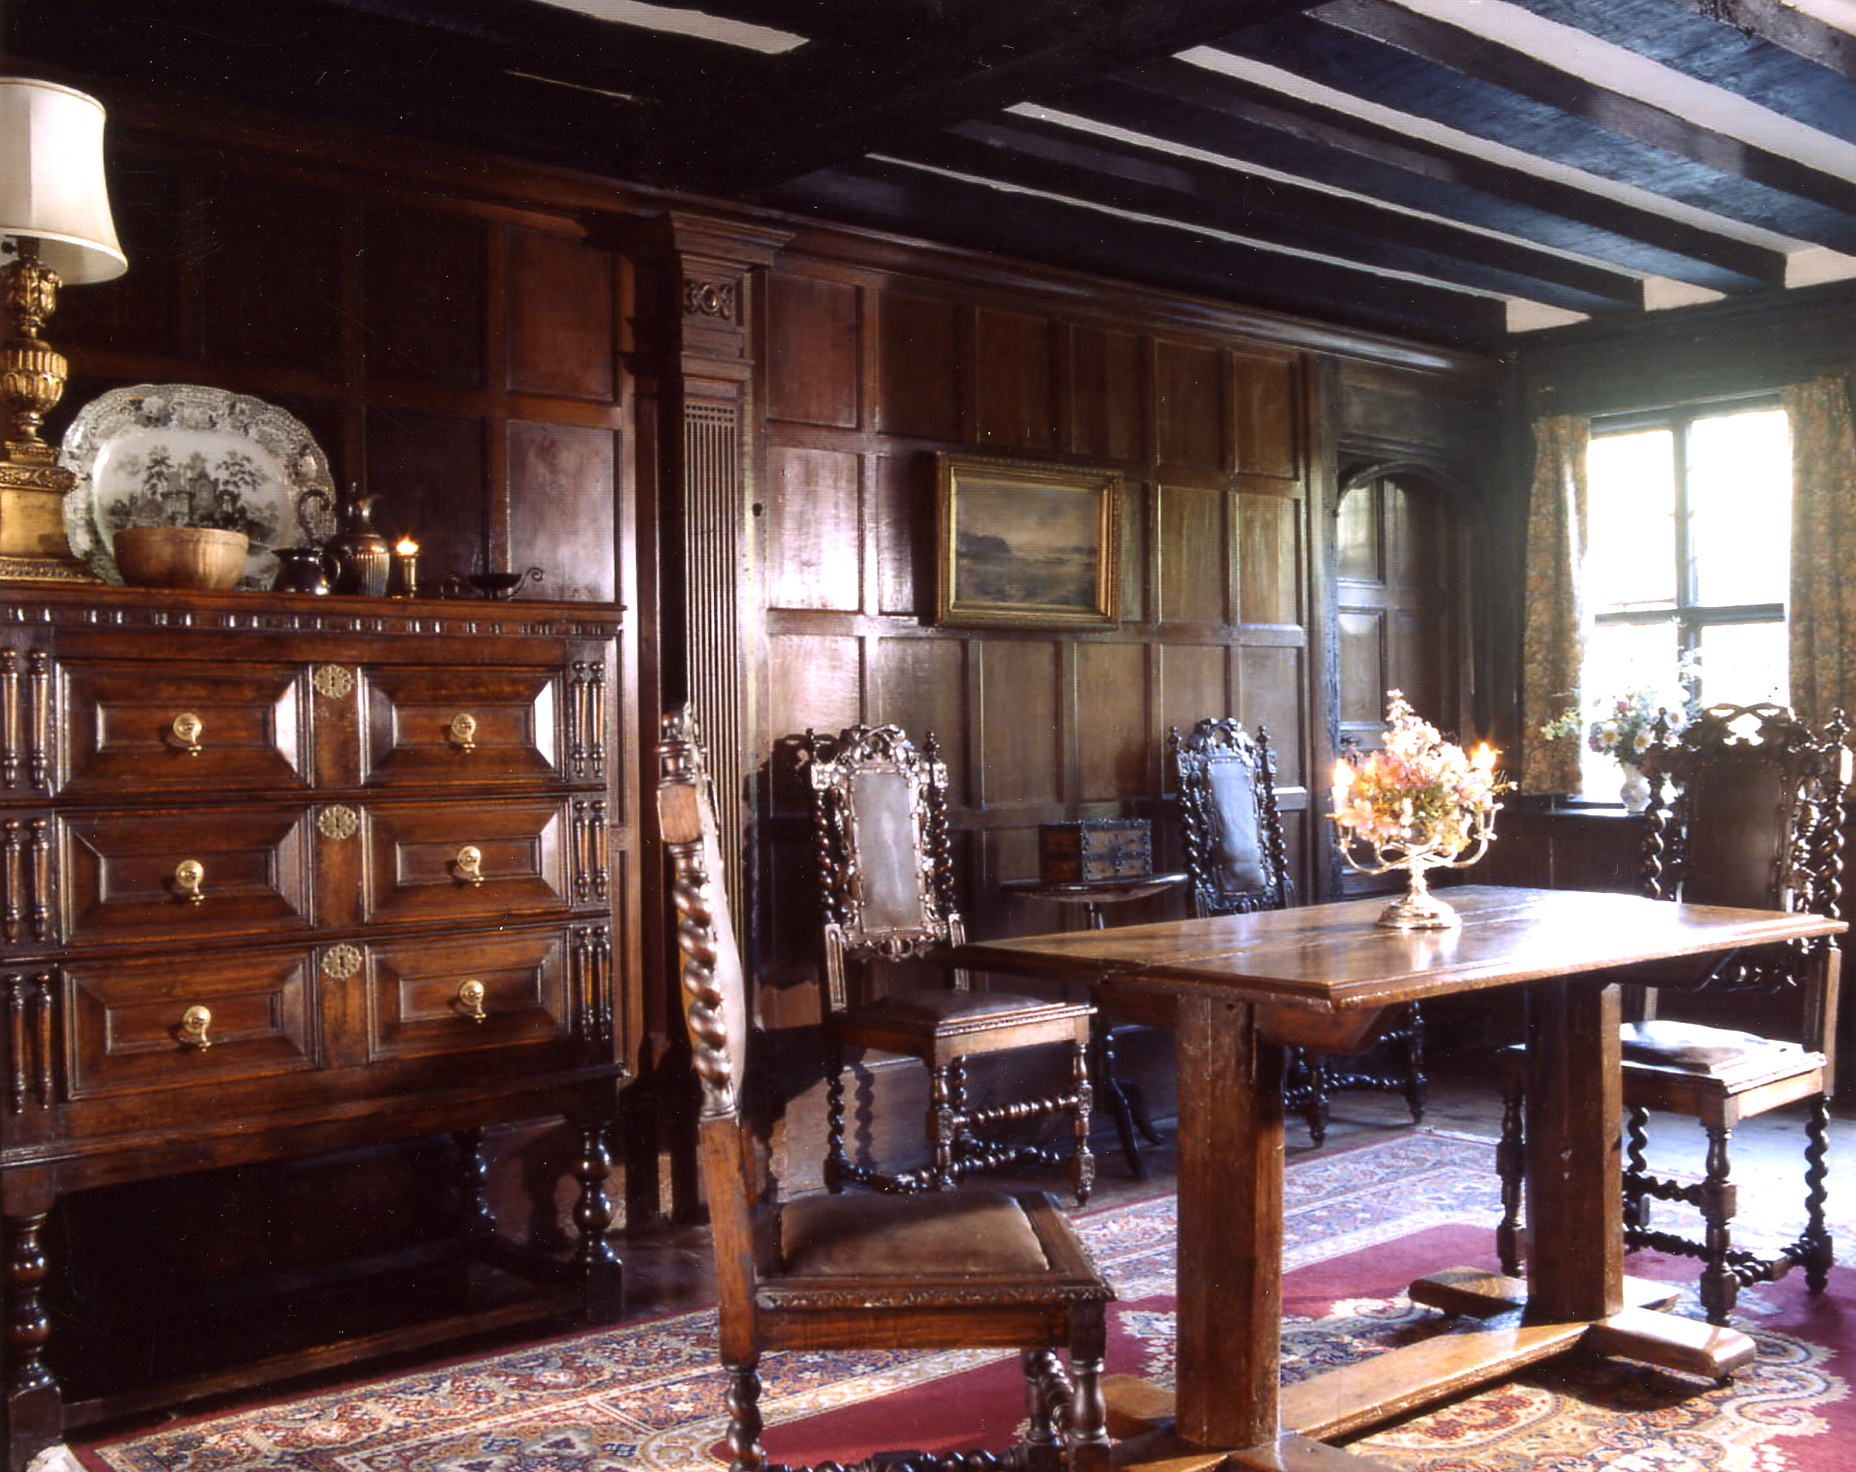 The entrance hall with wood paneled walls, a table and chairs and an ornate wooden tall boy